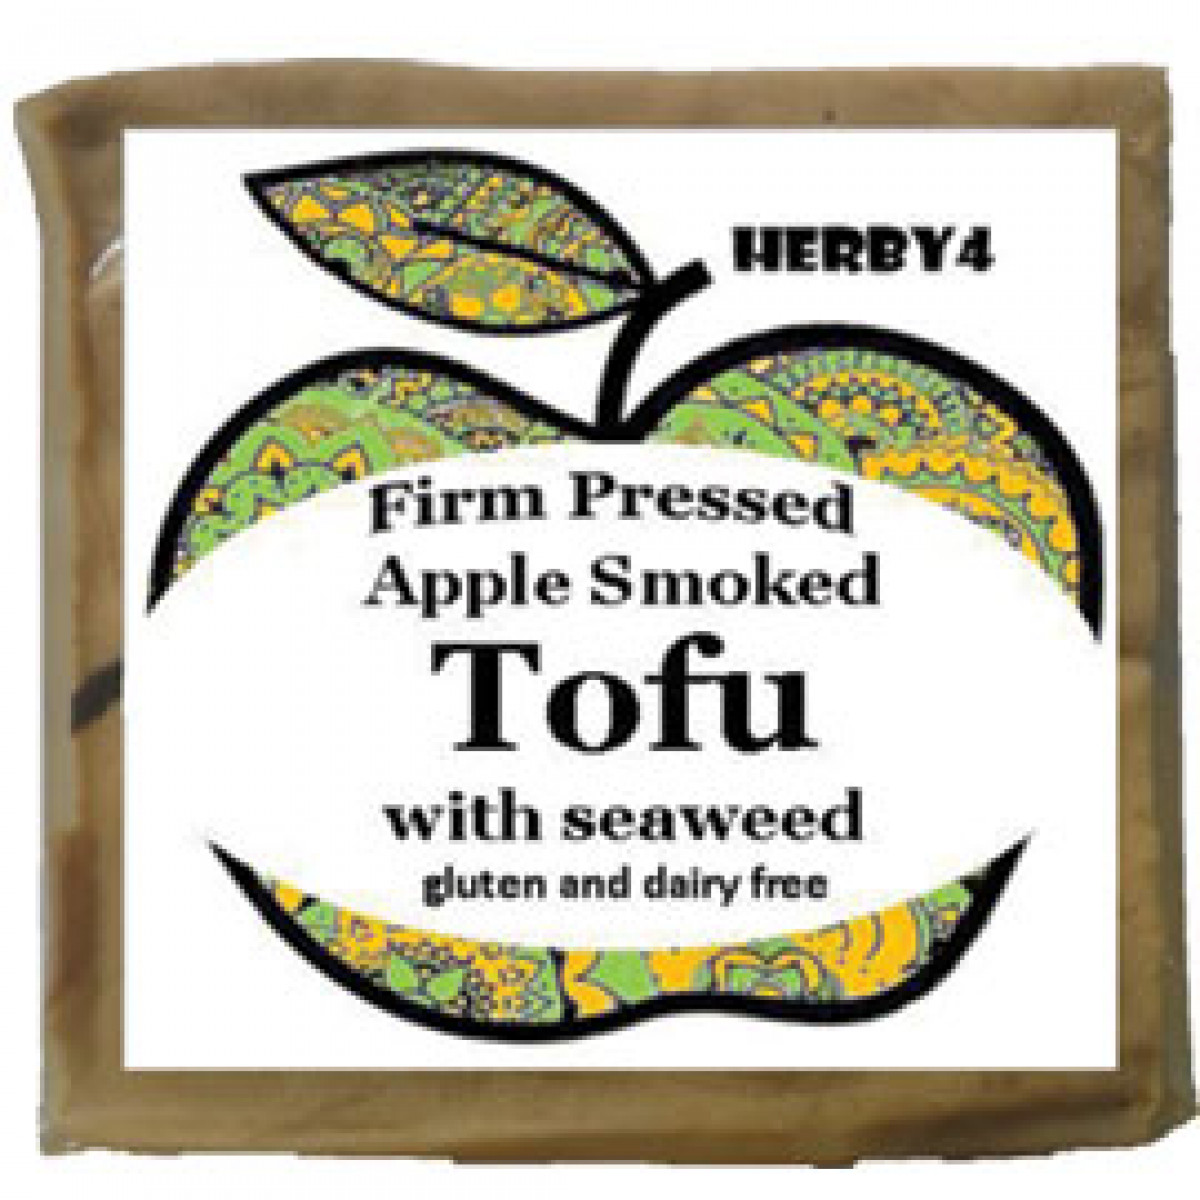 Product picture for Apple Smoked Tofu with Seaweed Firm Pressed